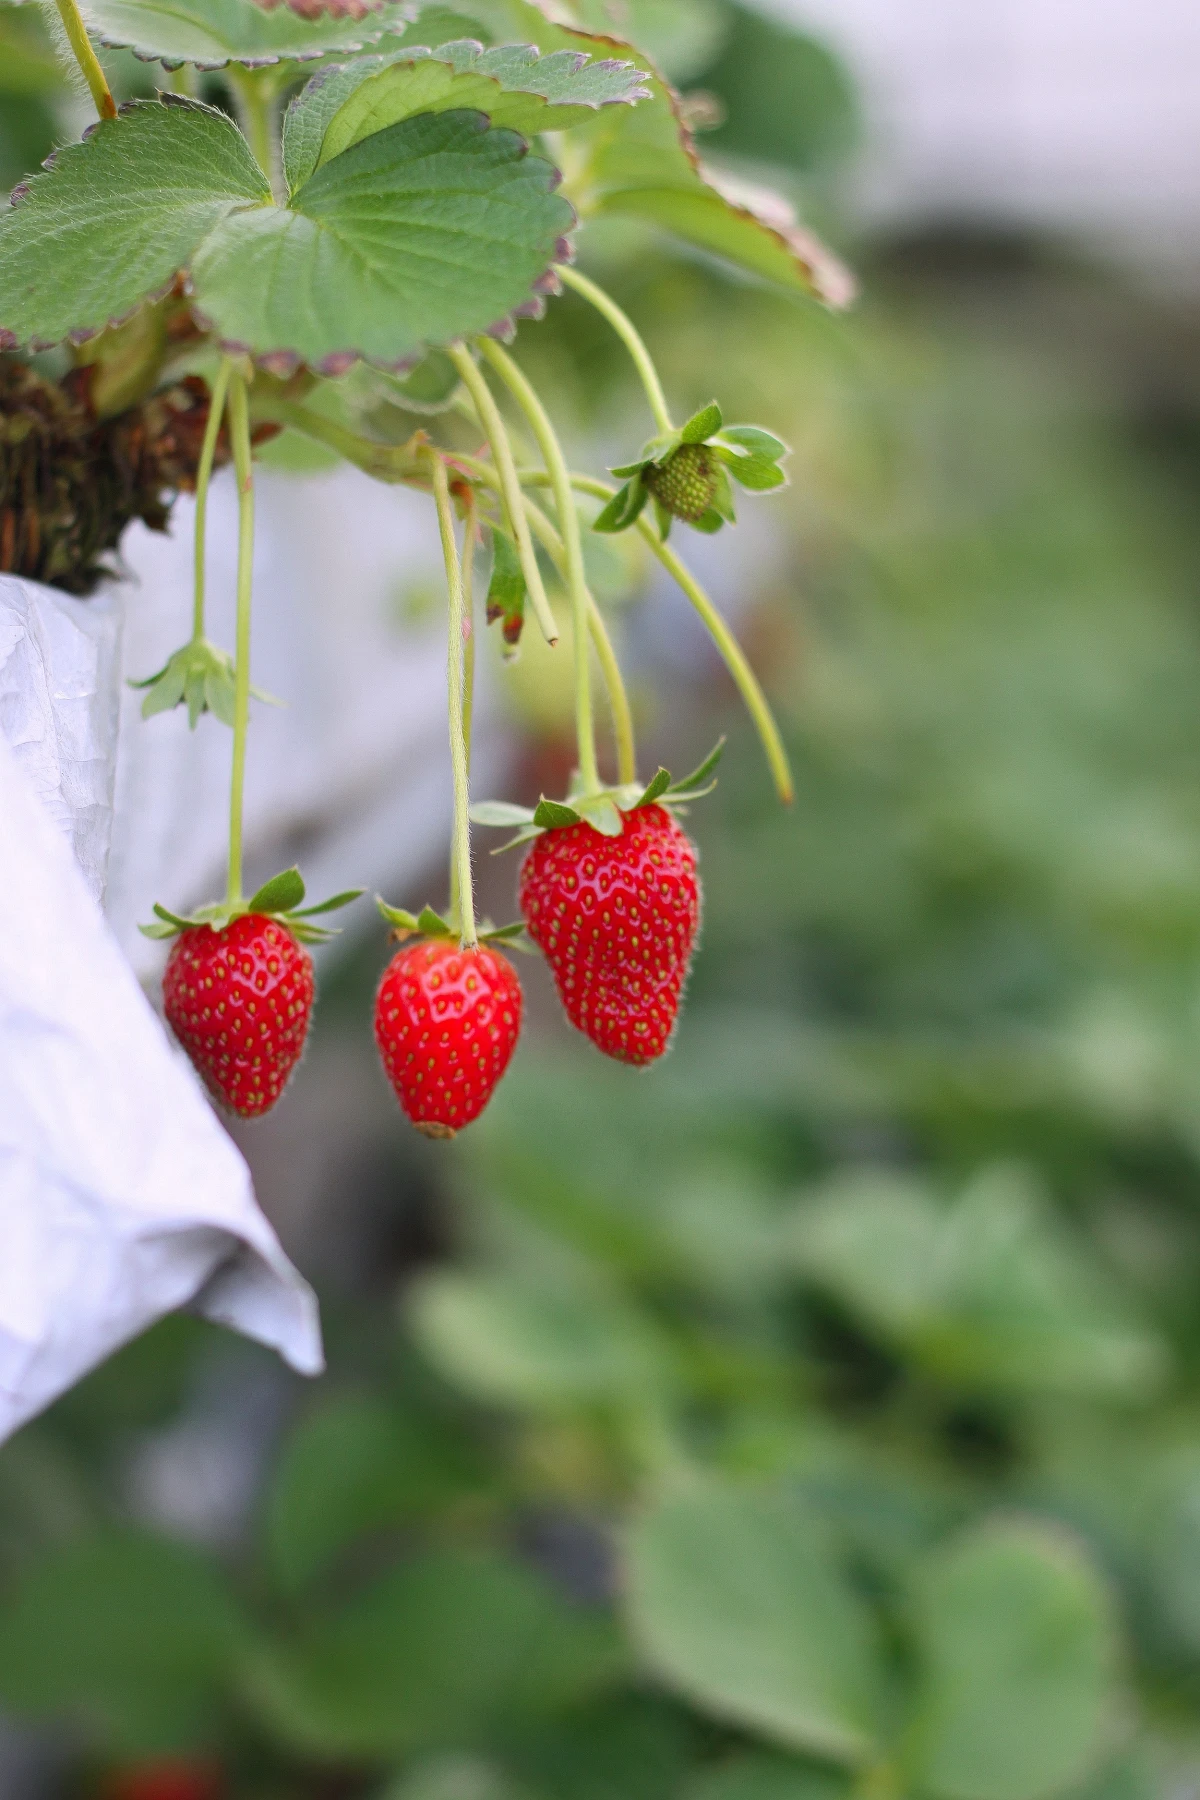 strawberries hanging from the side of the pot